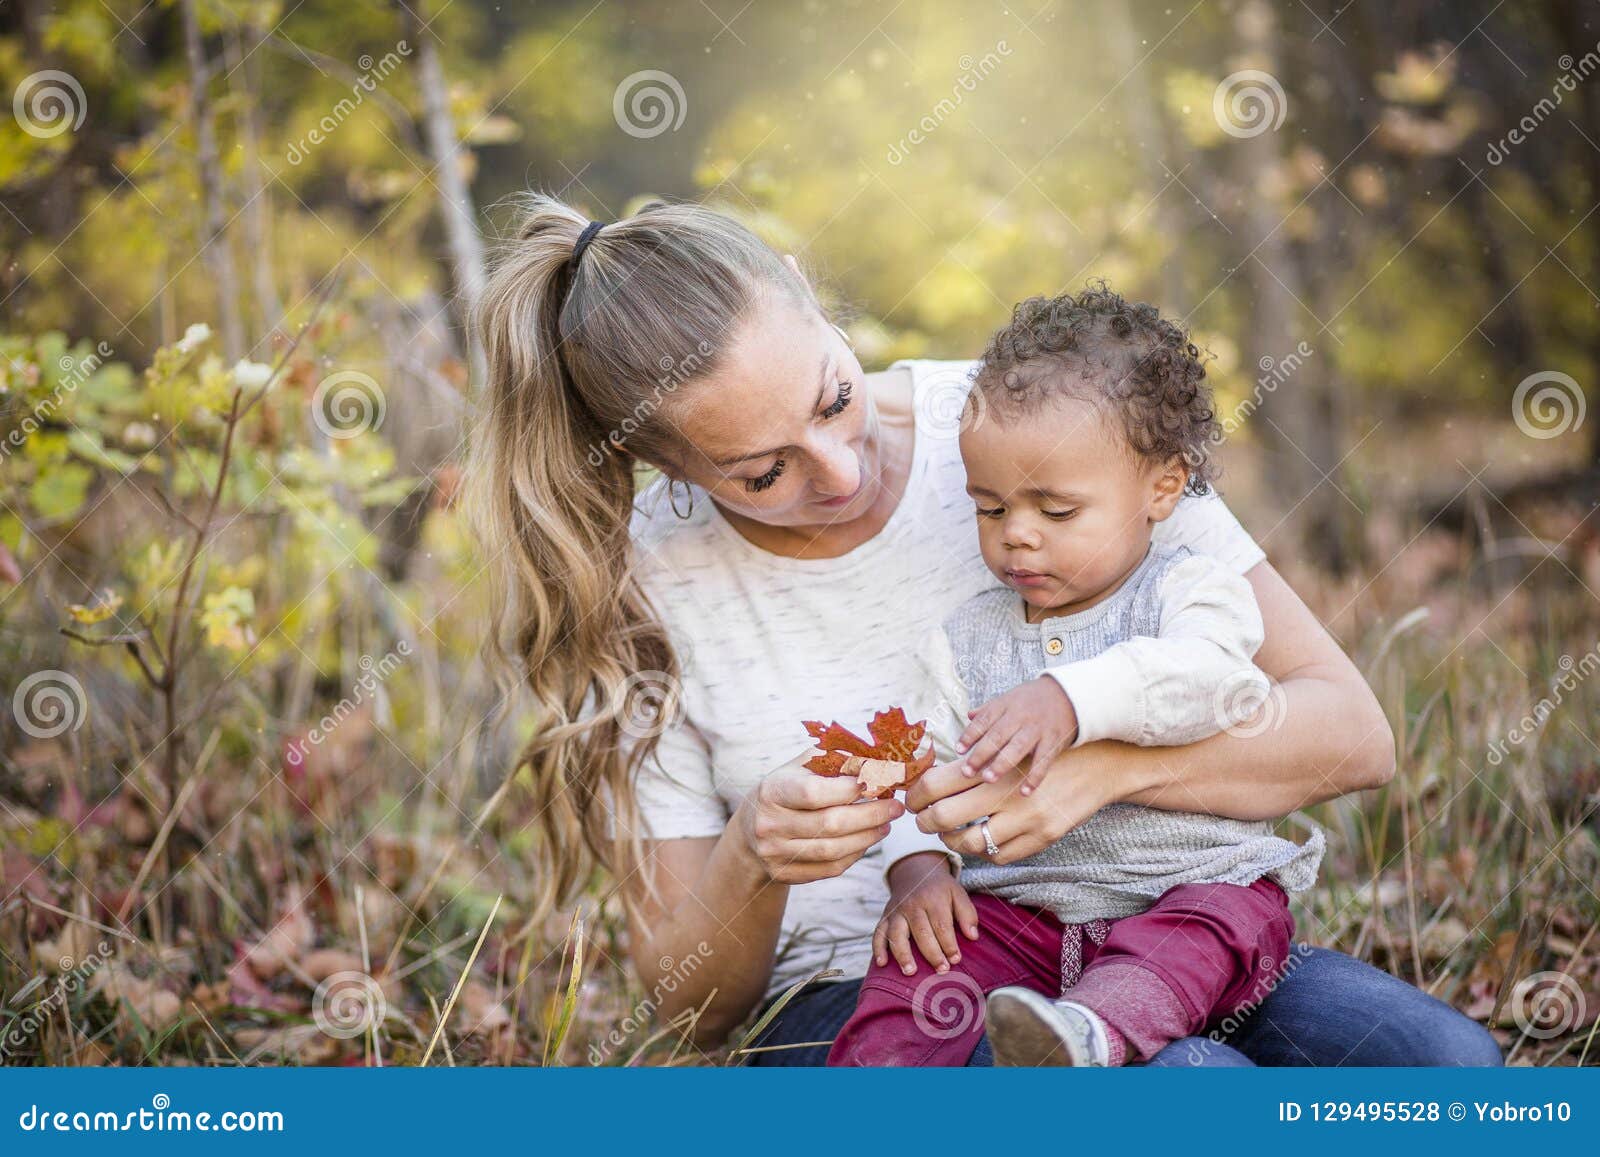 beautiful candid portrait of a mother playing with her cute bi-racial son